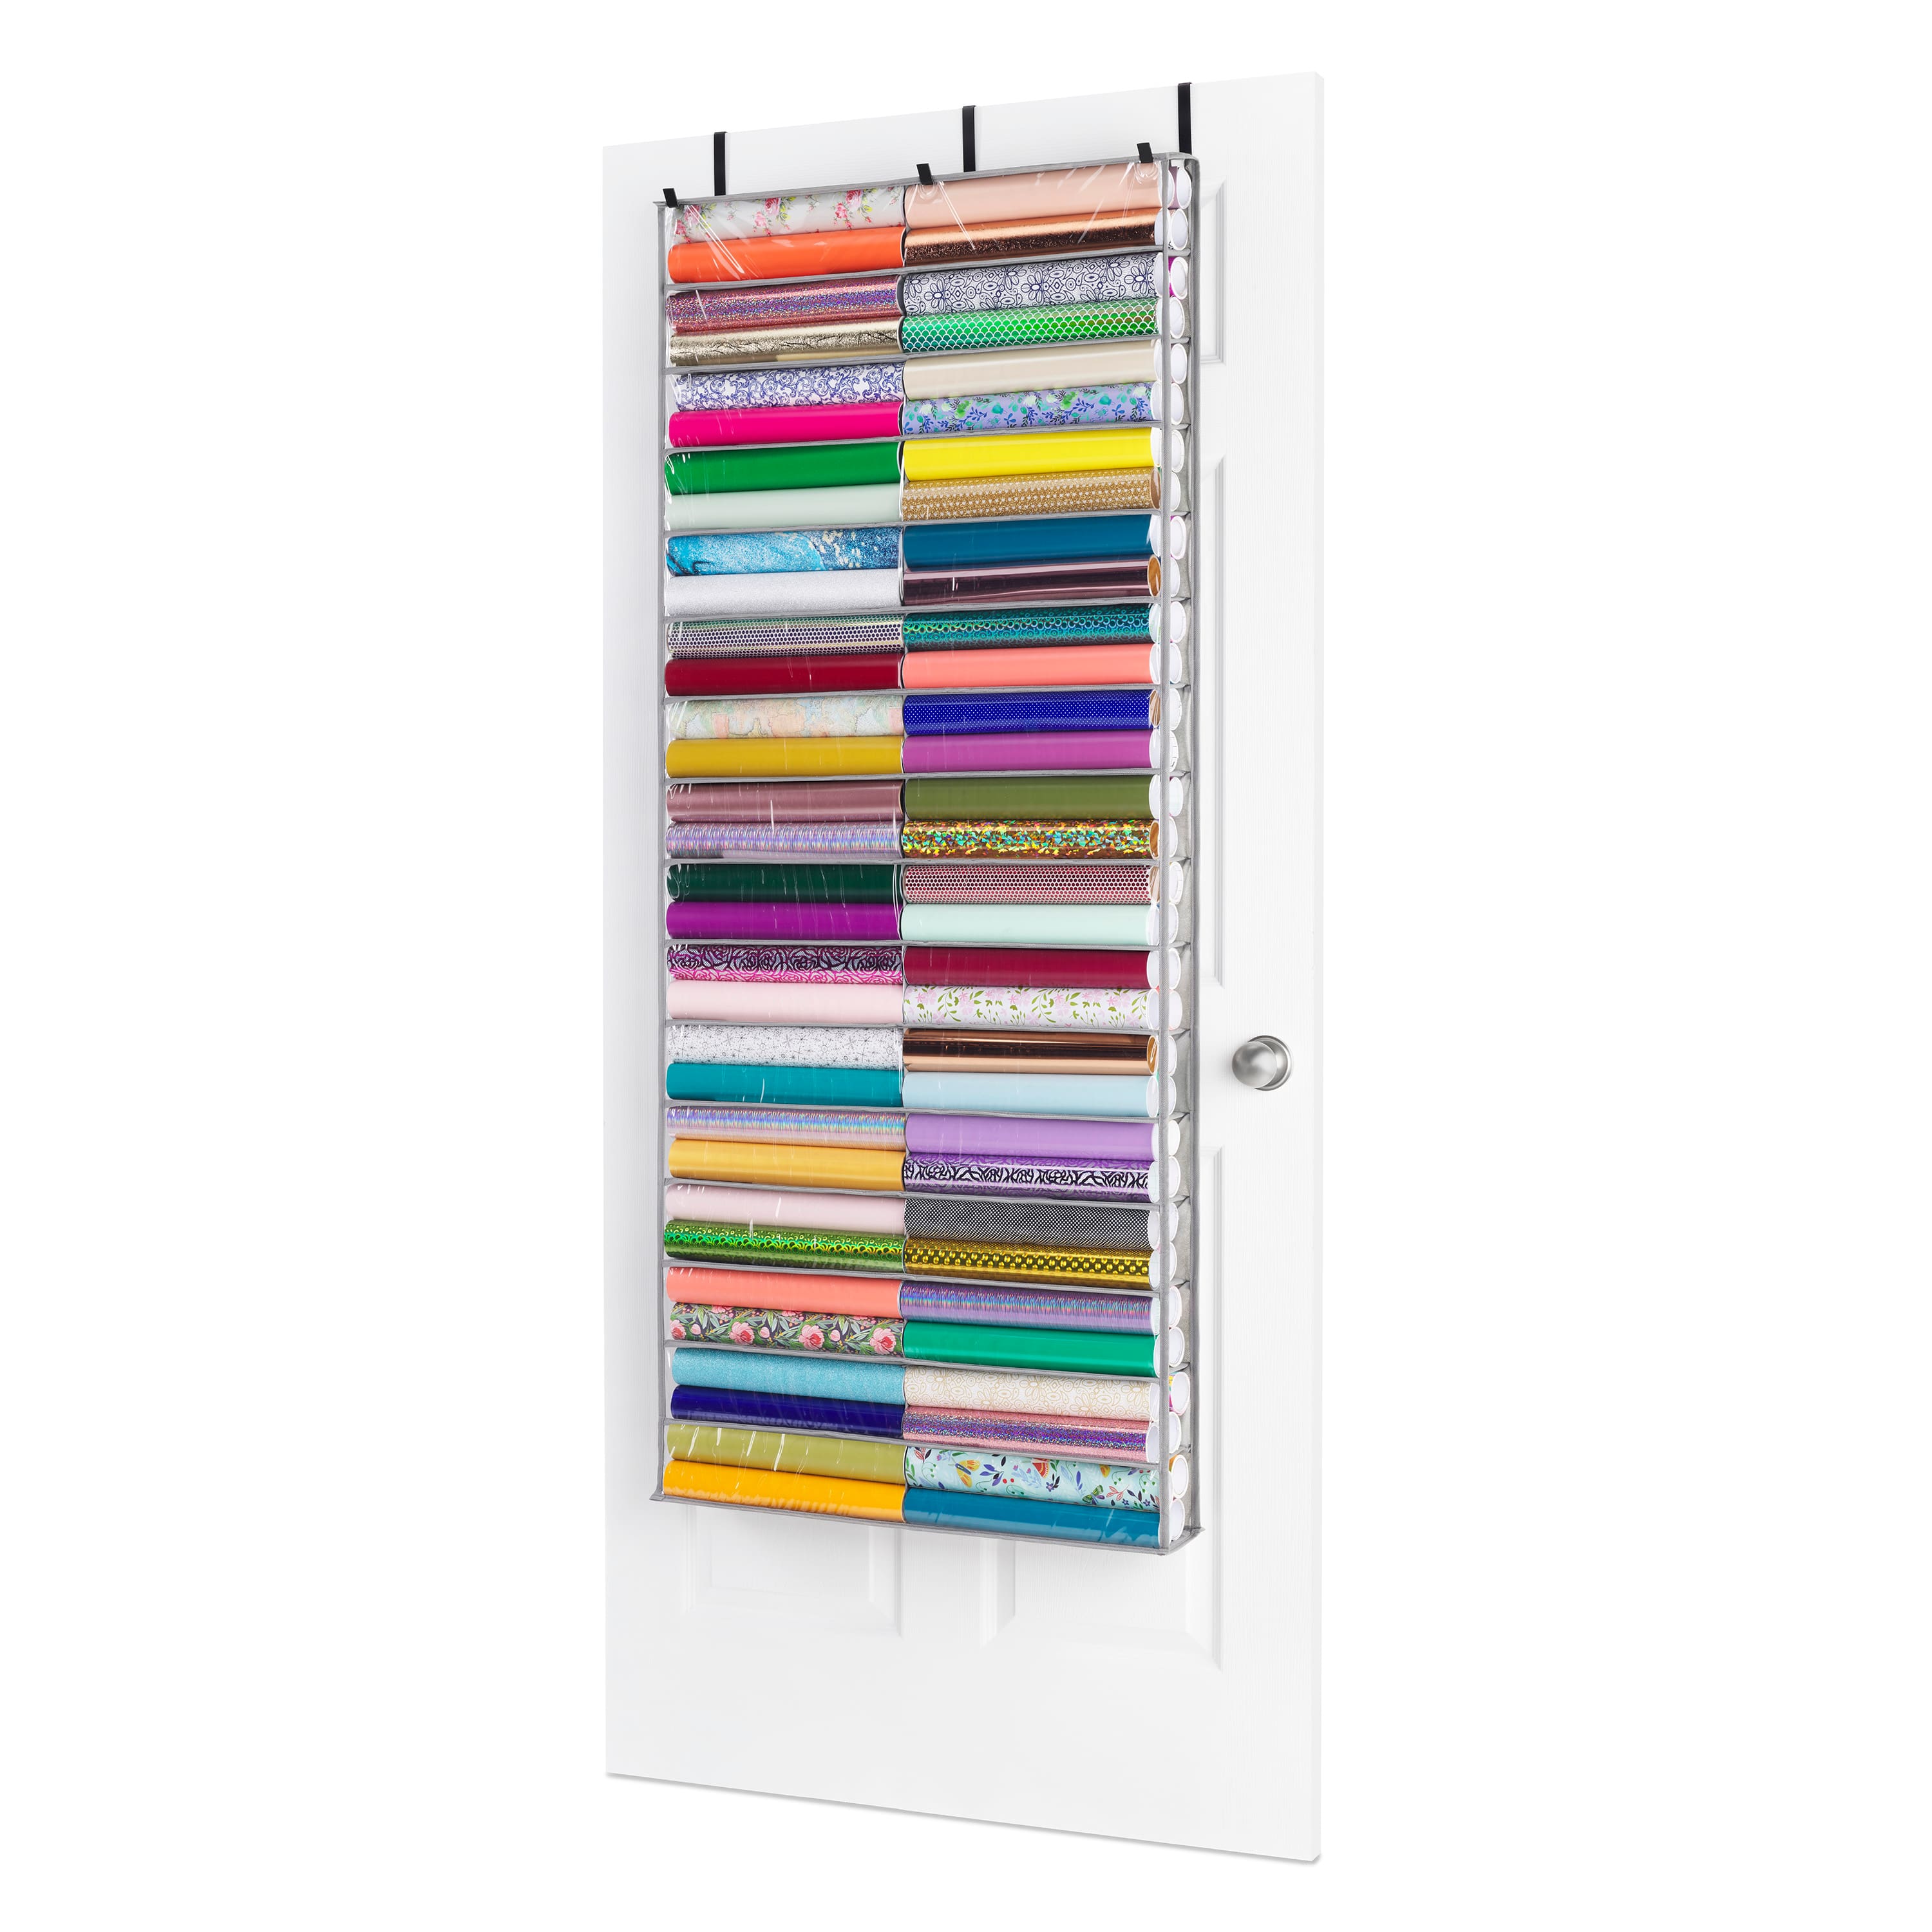 Simply Tidy Modular Storage from @Michaels Stores #ad offers tons